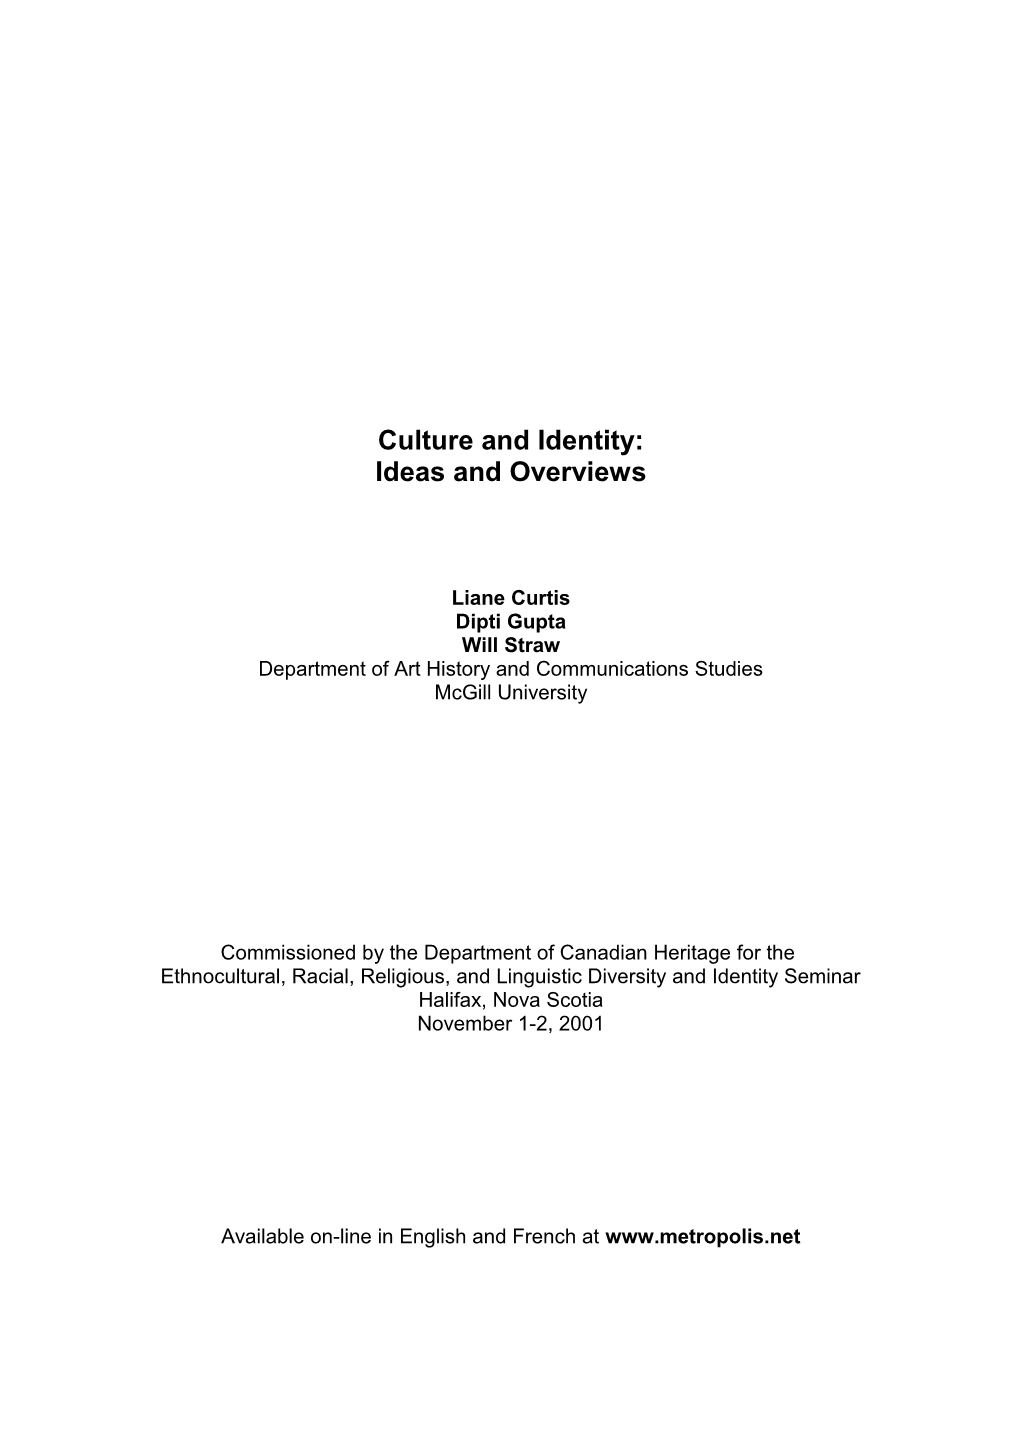 Culture and Identity: Ideas and Overviews